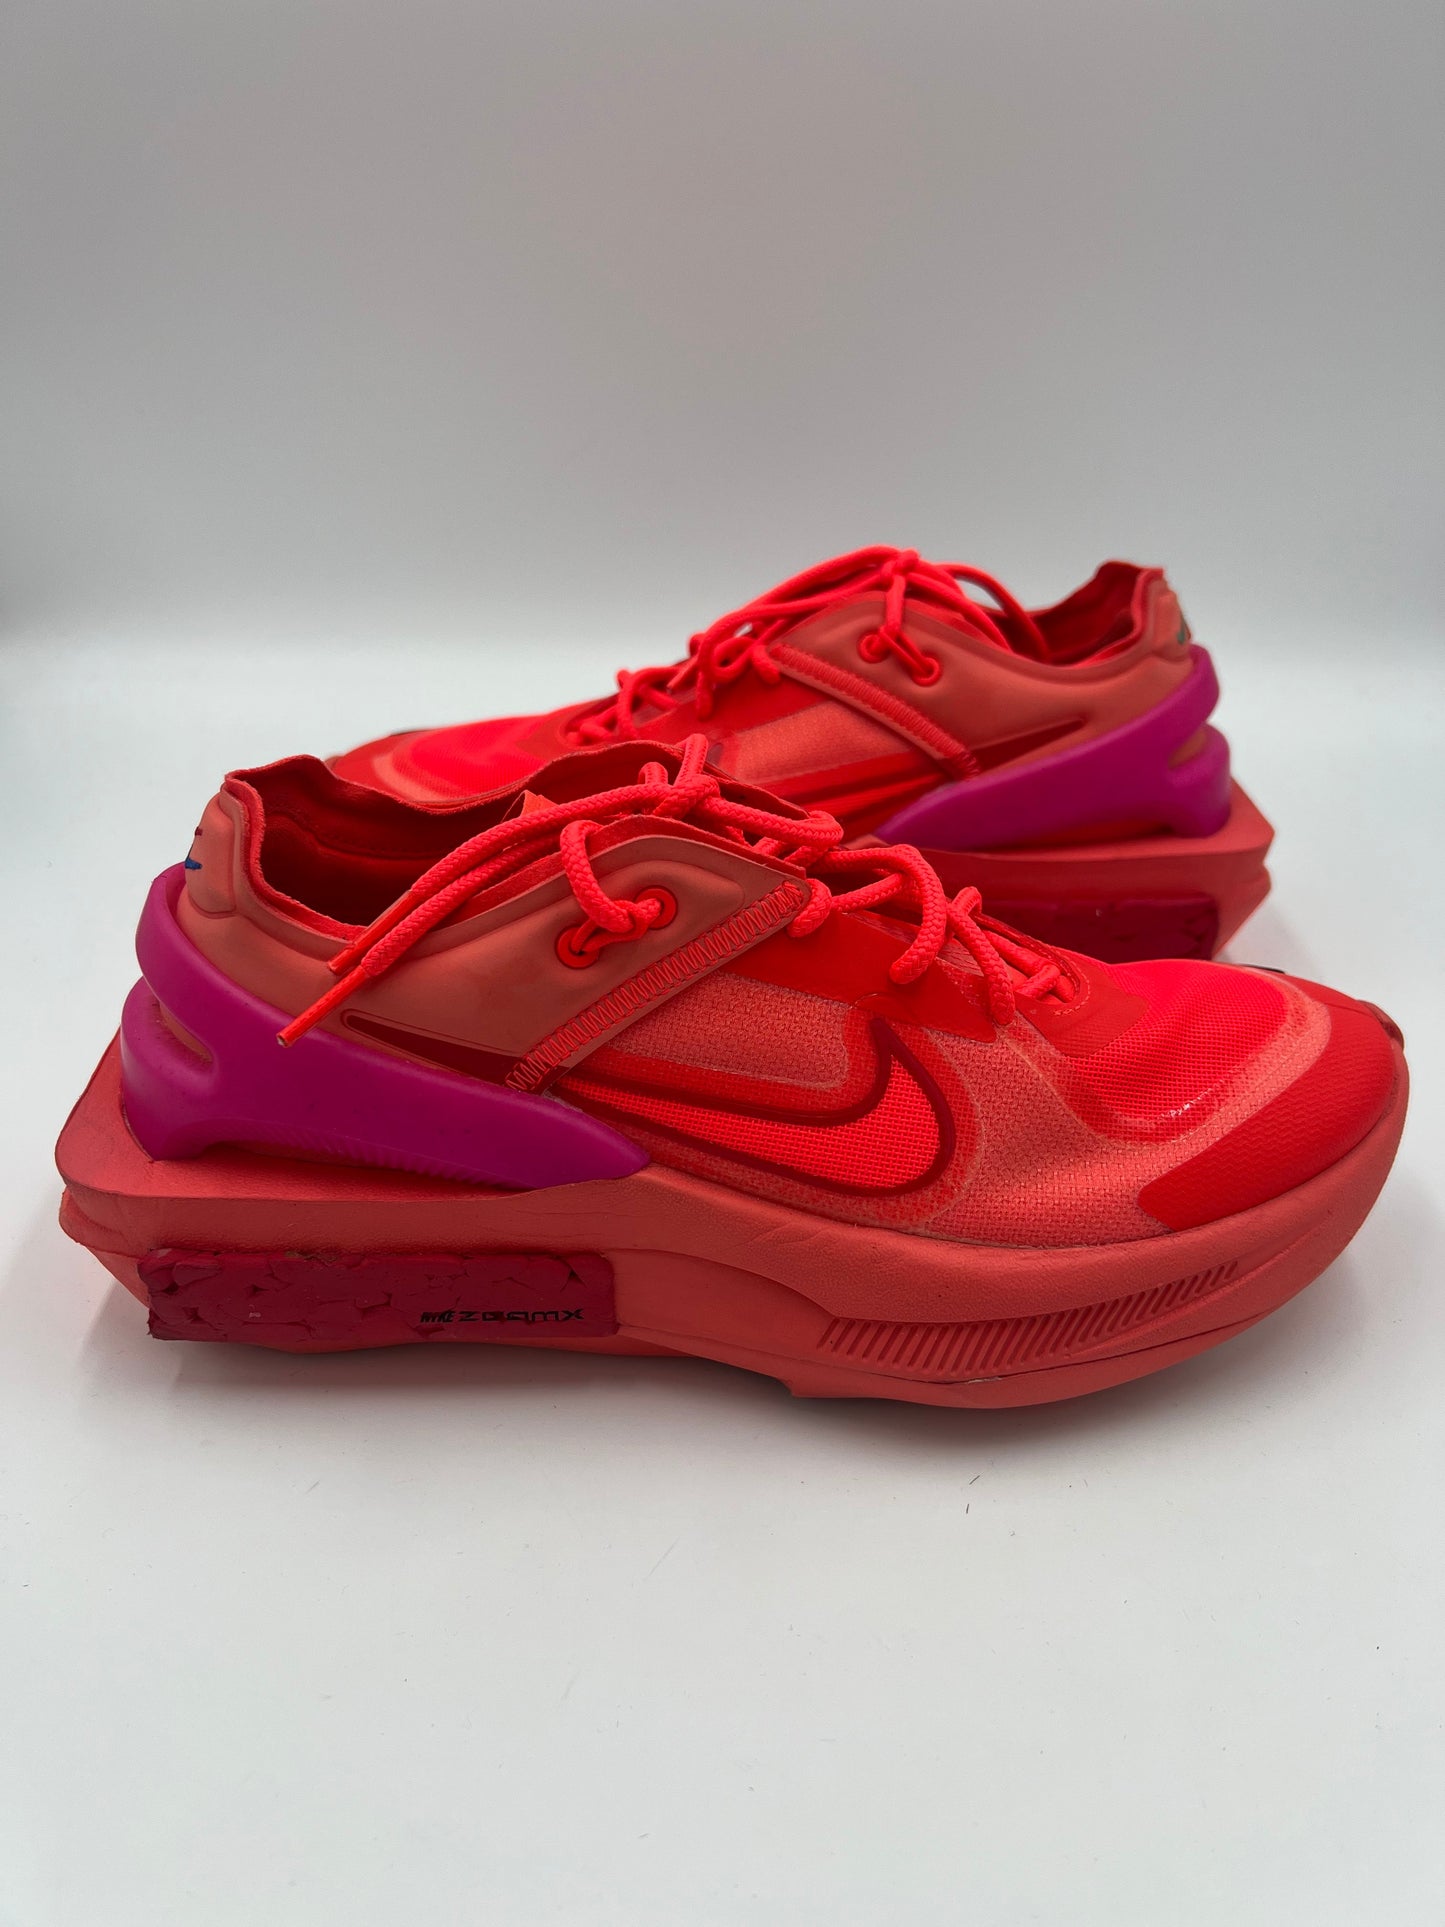 Red Shoes Athletic Nike, Size 8.5